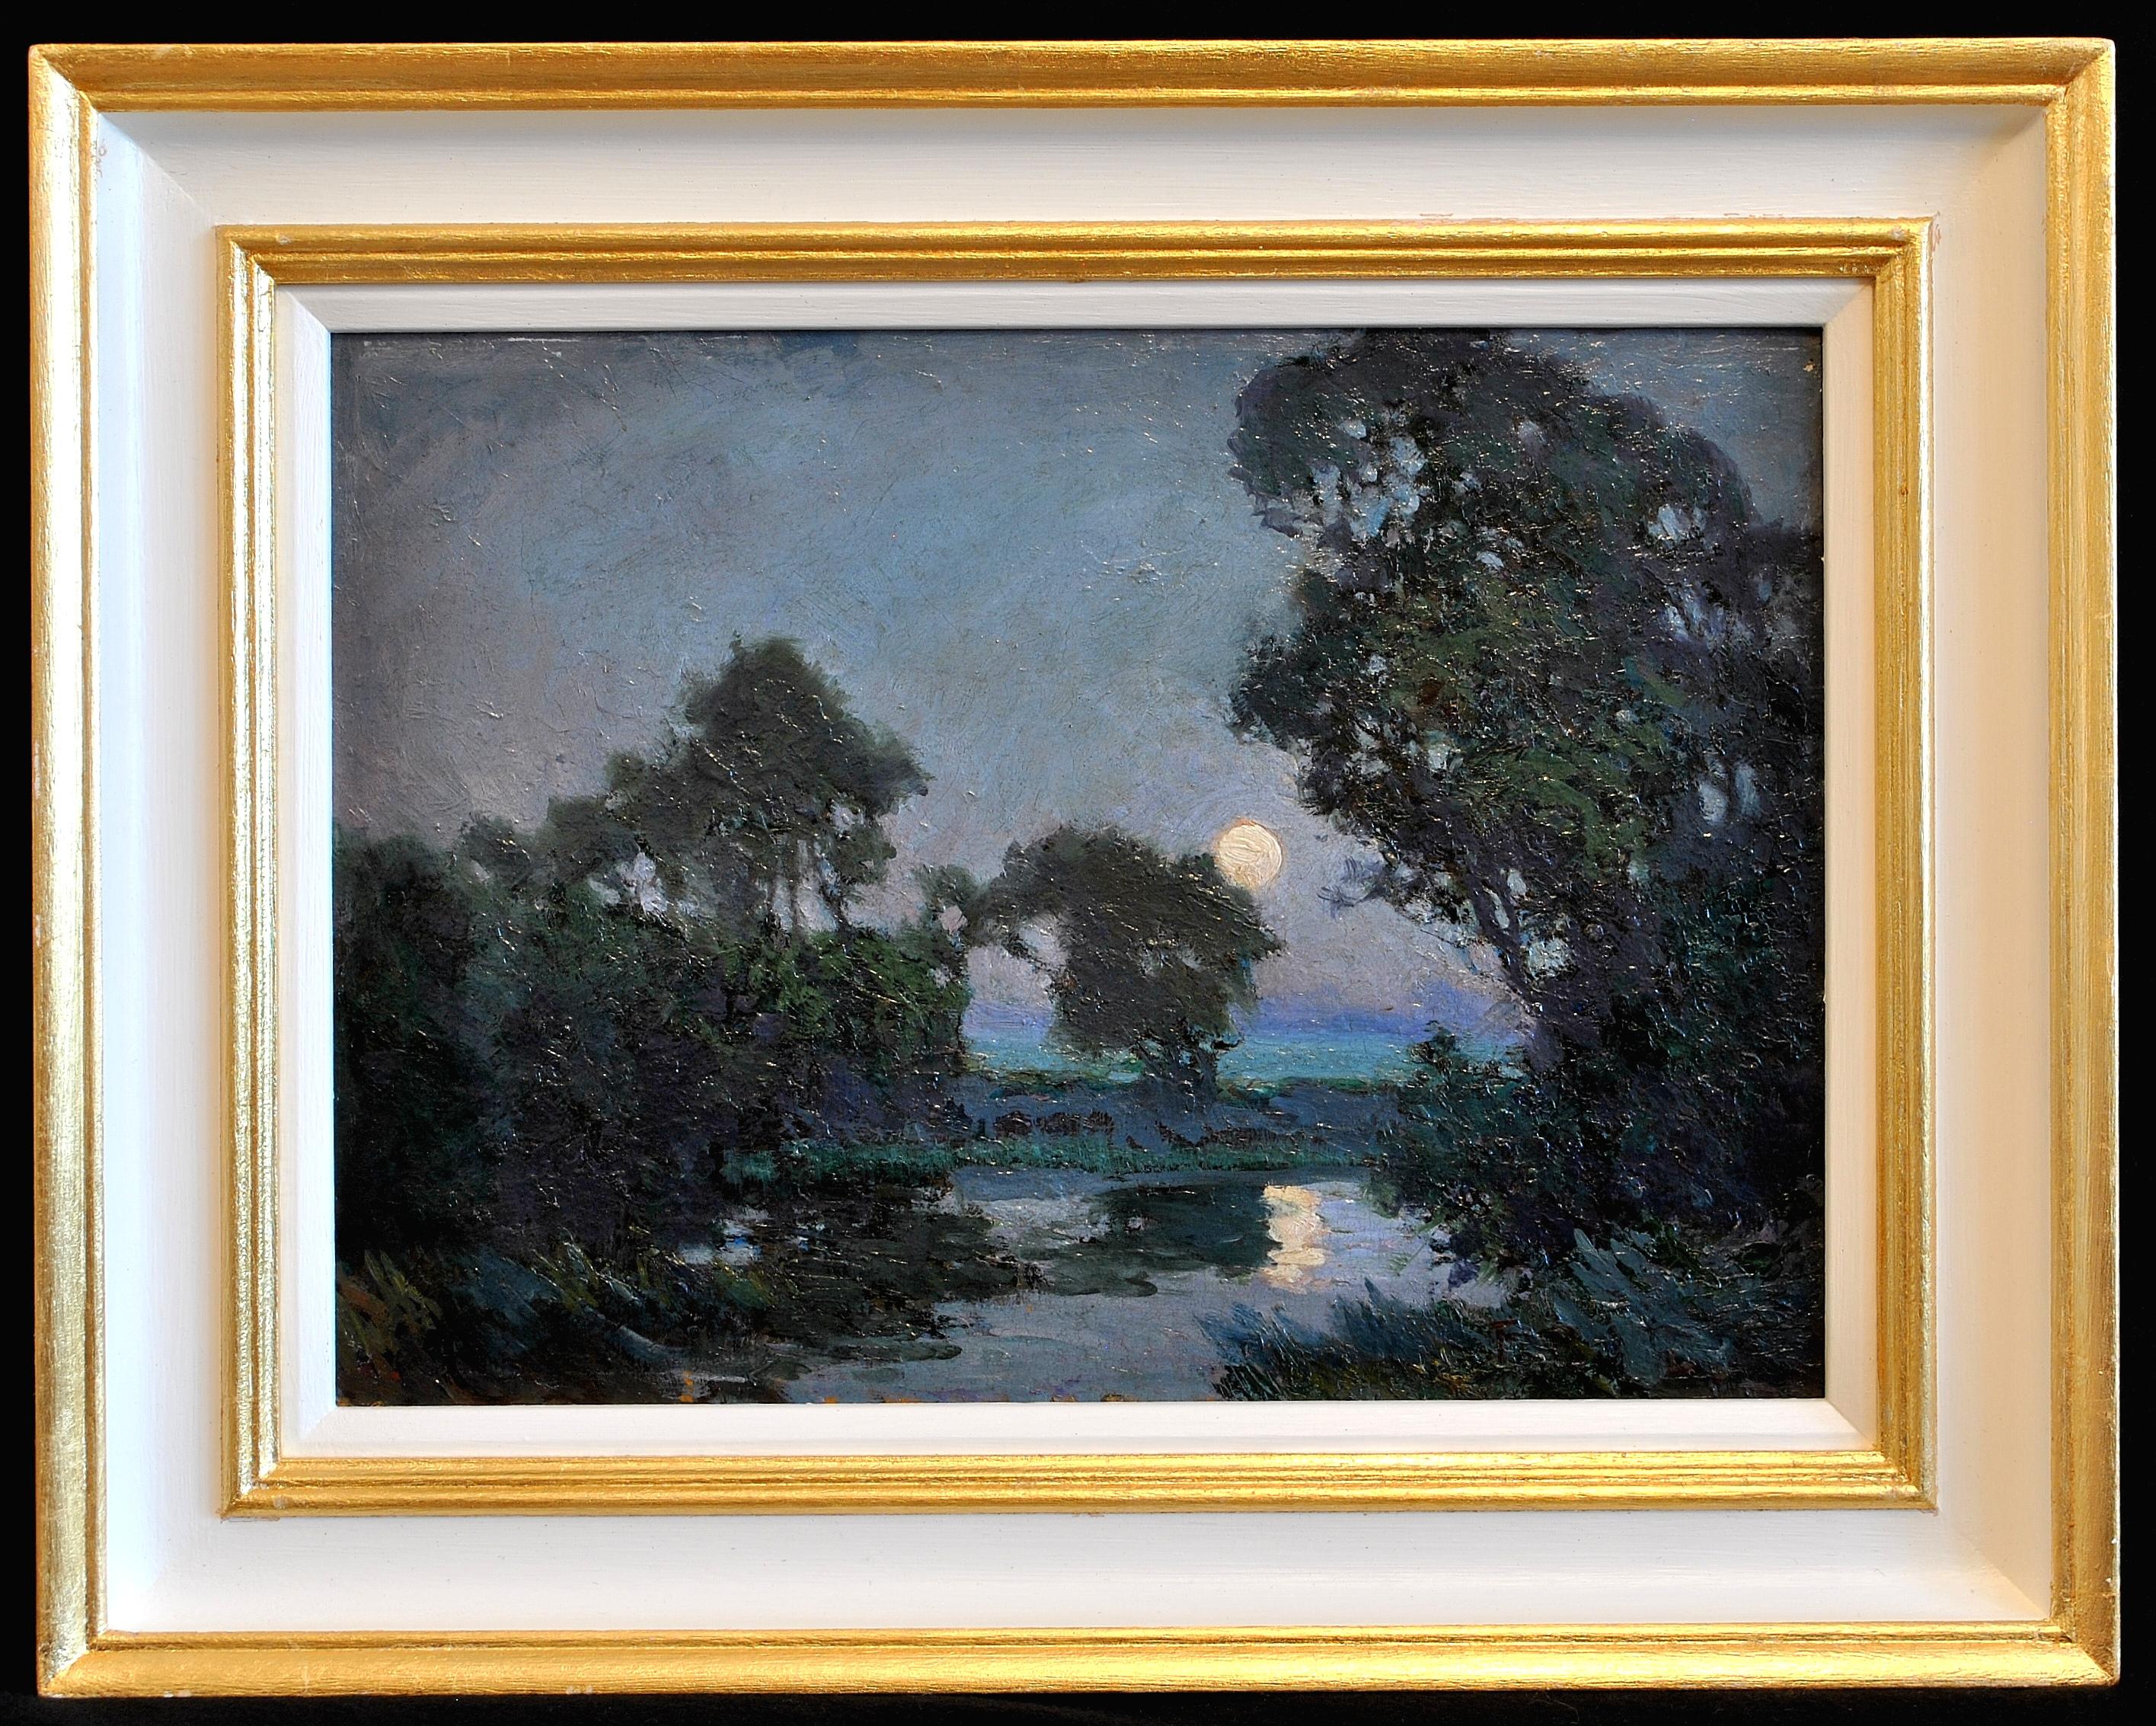 Fred Balshaw Landscape Painting - Moonlit River Landscape - Early 20th Century English Antique Oil Painting